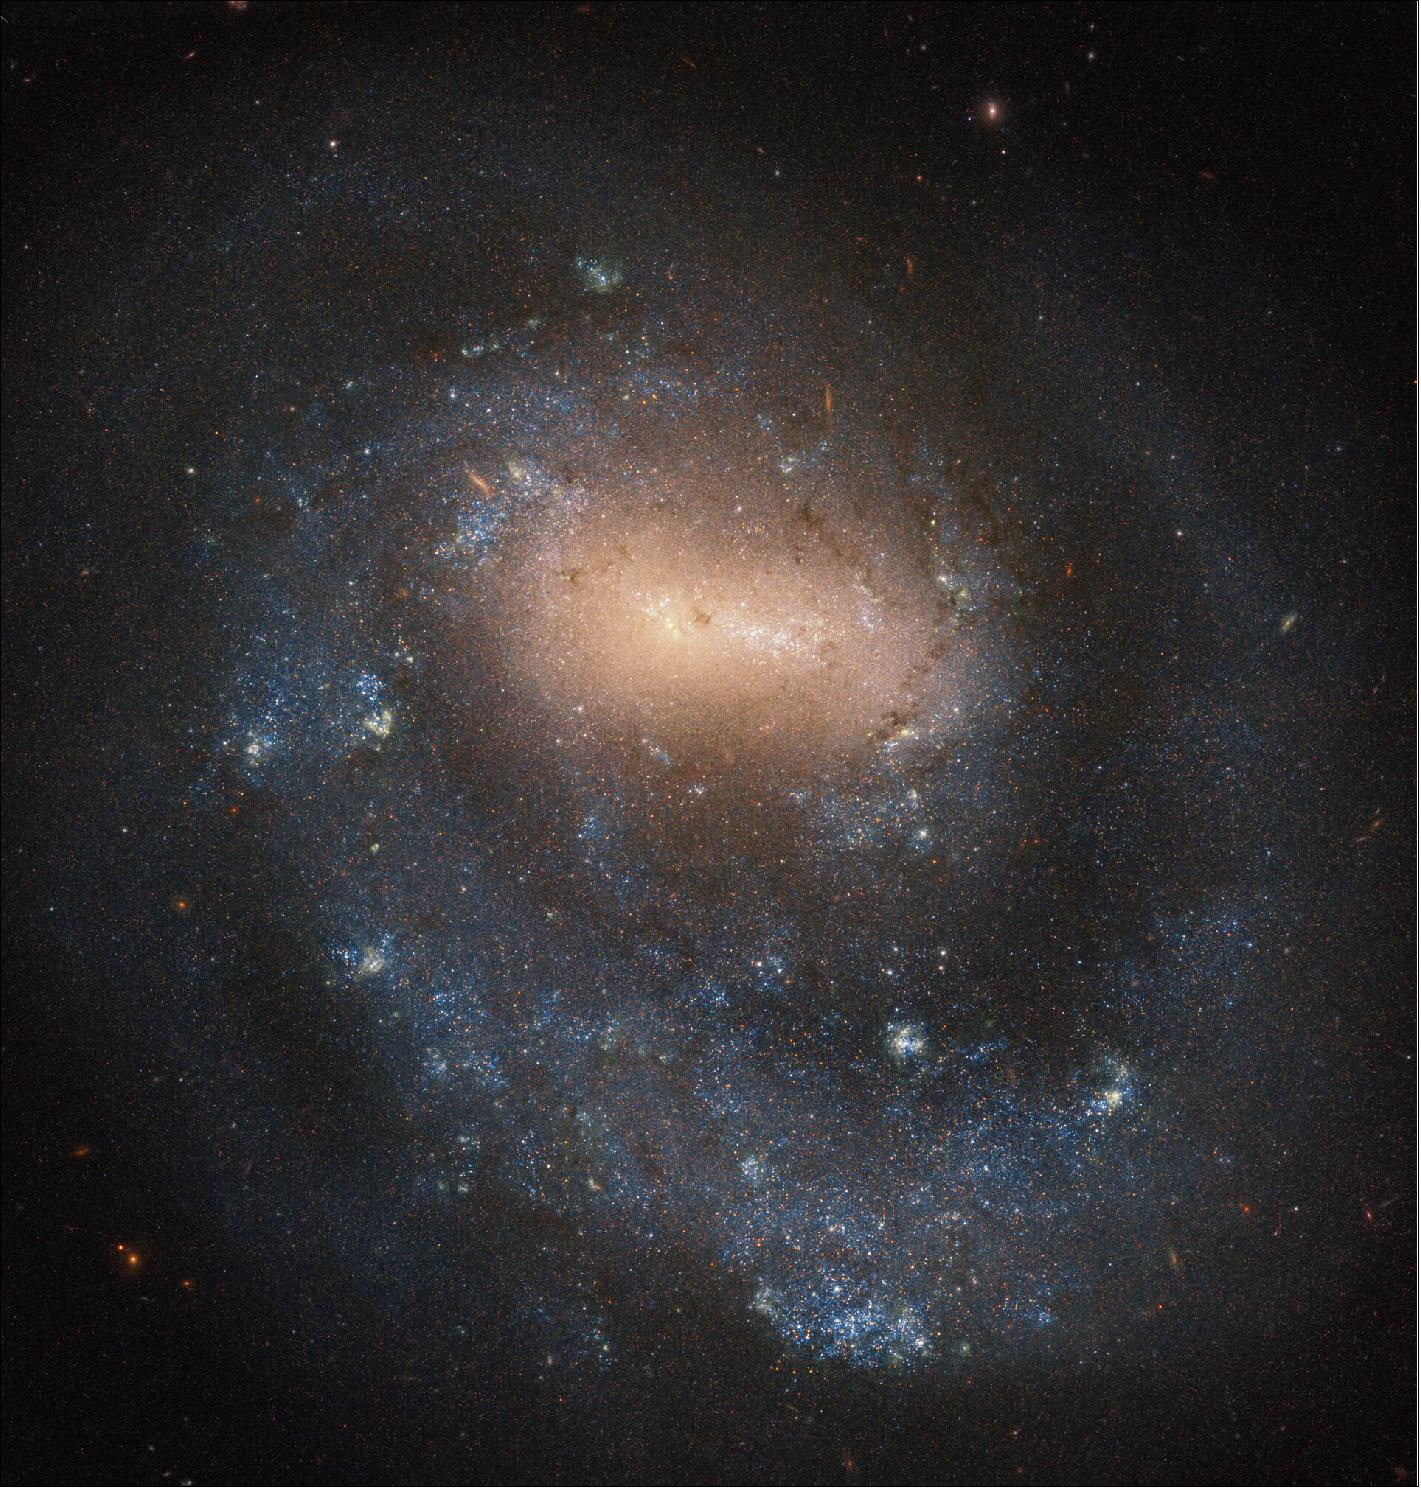 Figure 83: Located about 21 million light-years from our galaxy in the constellation Canes Venatici, NGC 4618 has a diameter of about one third that of the Milky Way. Together with its neighbor, NGC 4625, it forms an interacting galaxy pair, which means that the two galaxies are close enough to influence each other gravitationally. These interactions may result in the two (or more) galaxies merging together to form a new formation, such as a ring galaxy (image credit: ESA/Hubble & NASA, I. Karachentsev; CC BY 4.0)